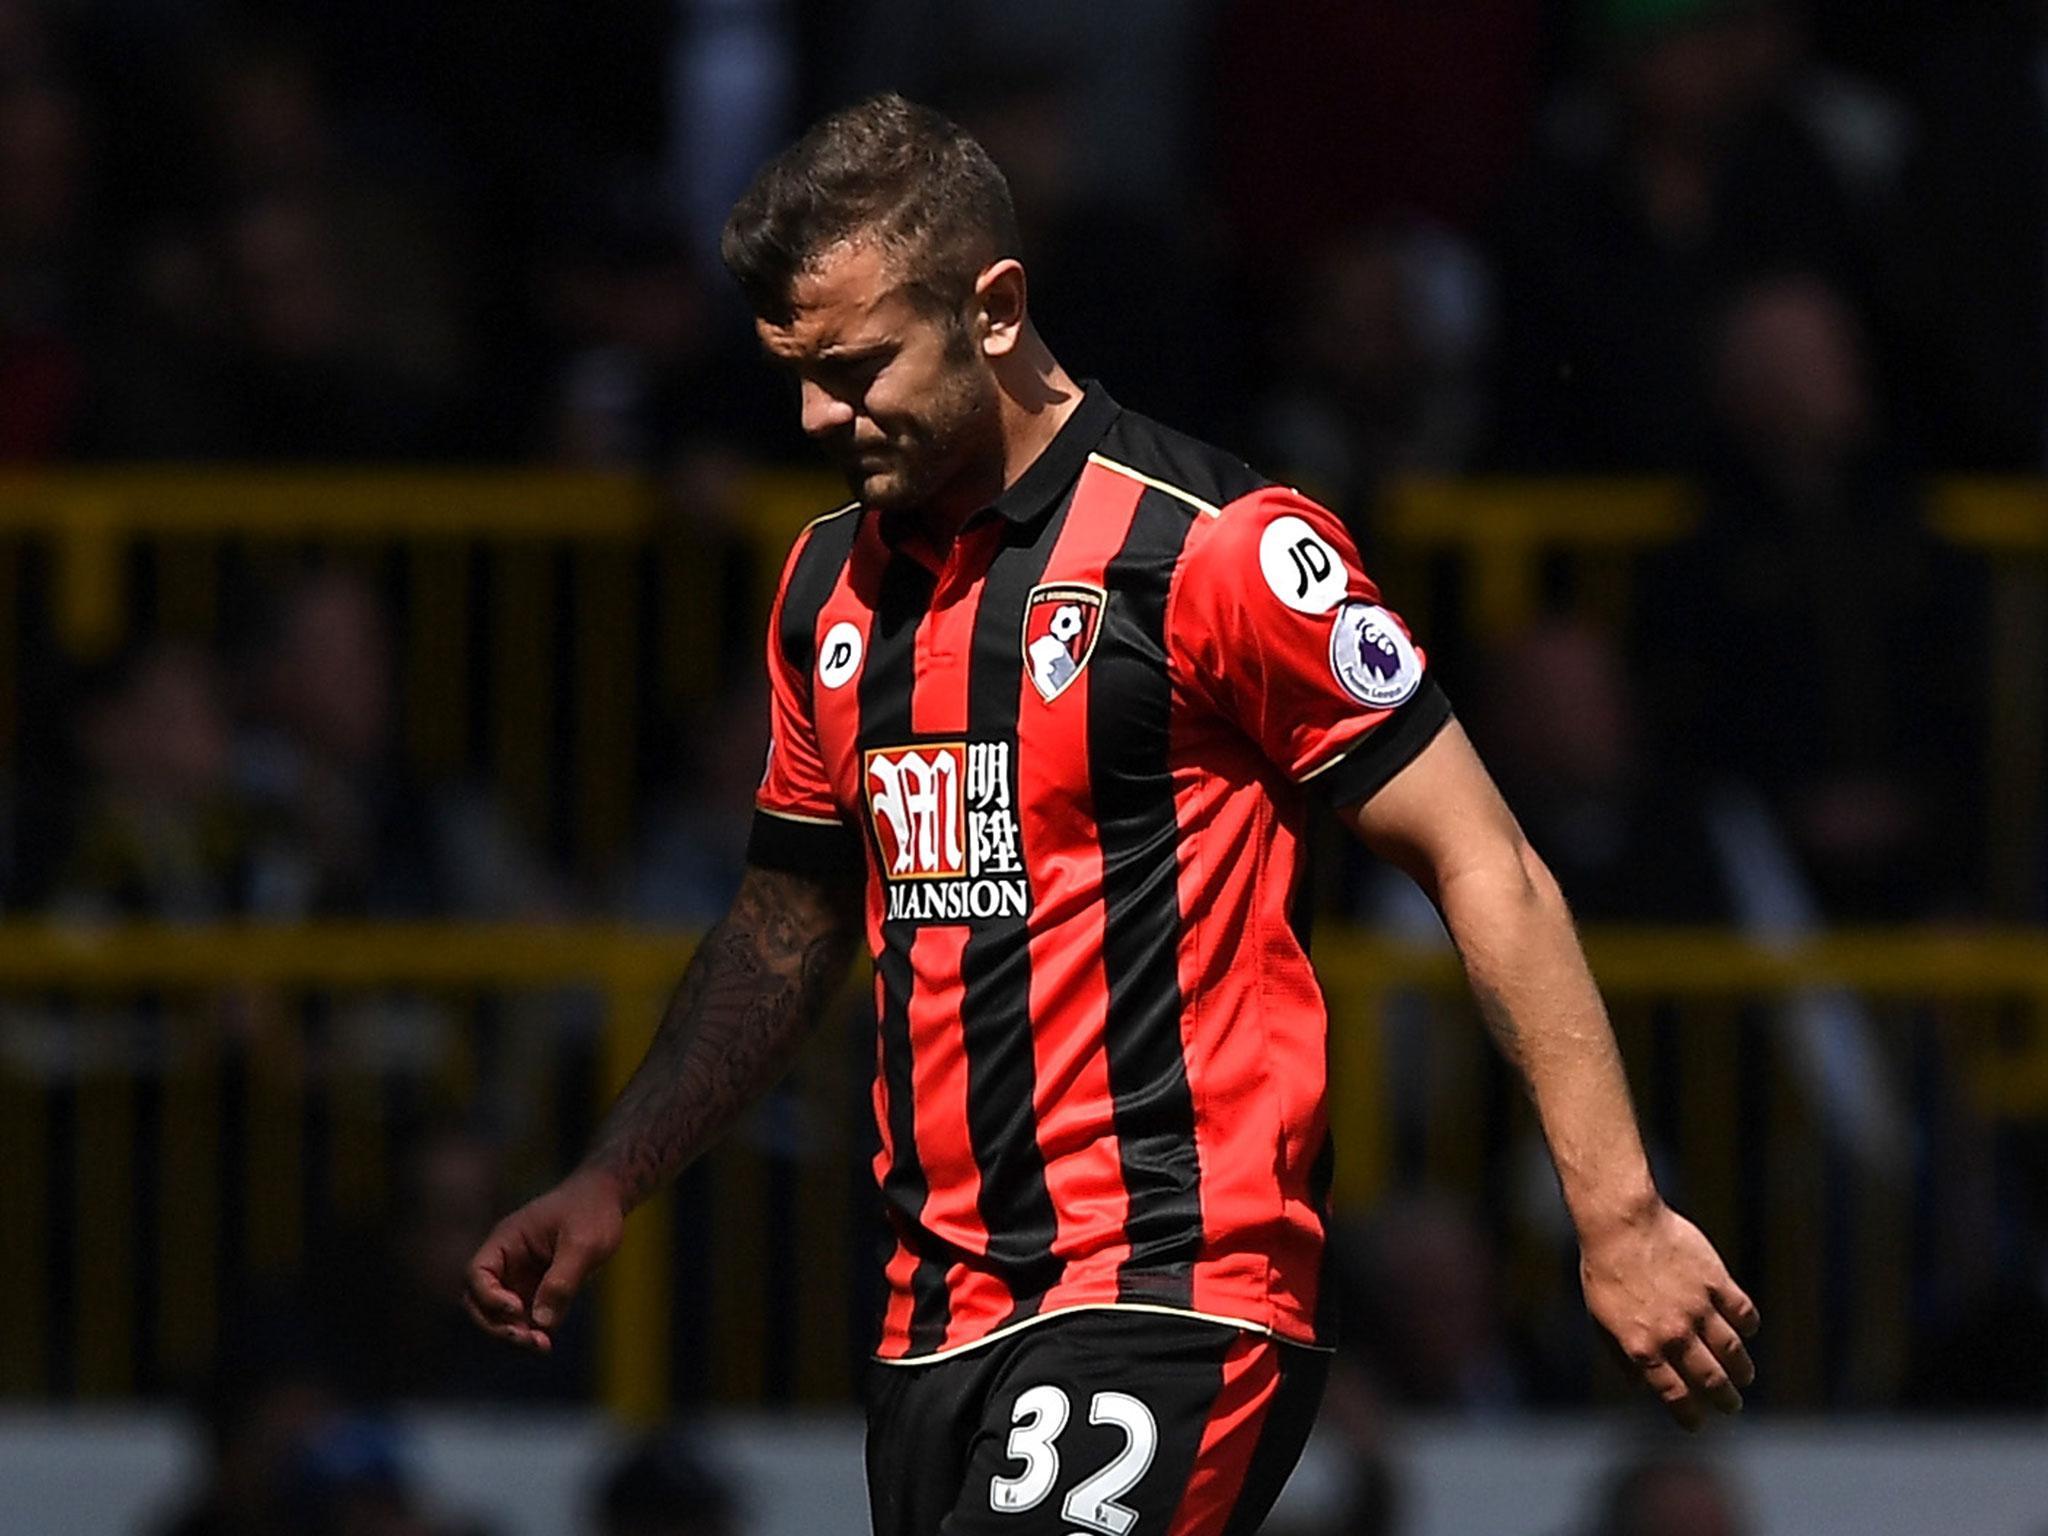 Jack Wilshere's season is over after a fracture in his left leg